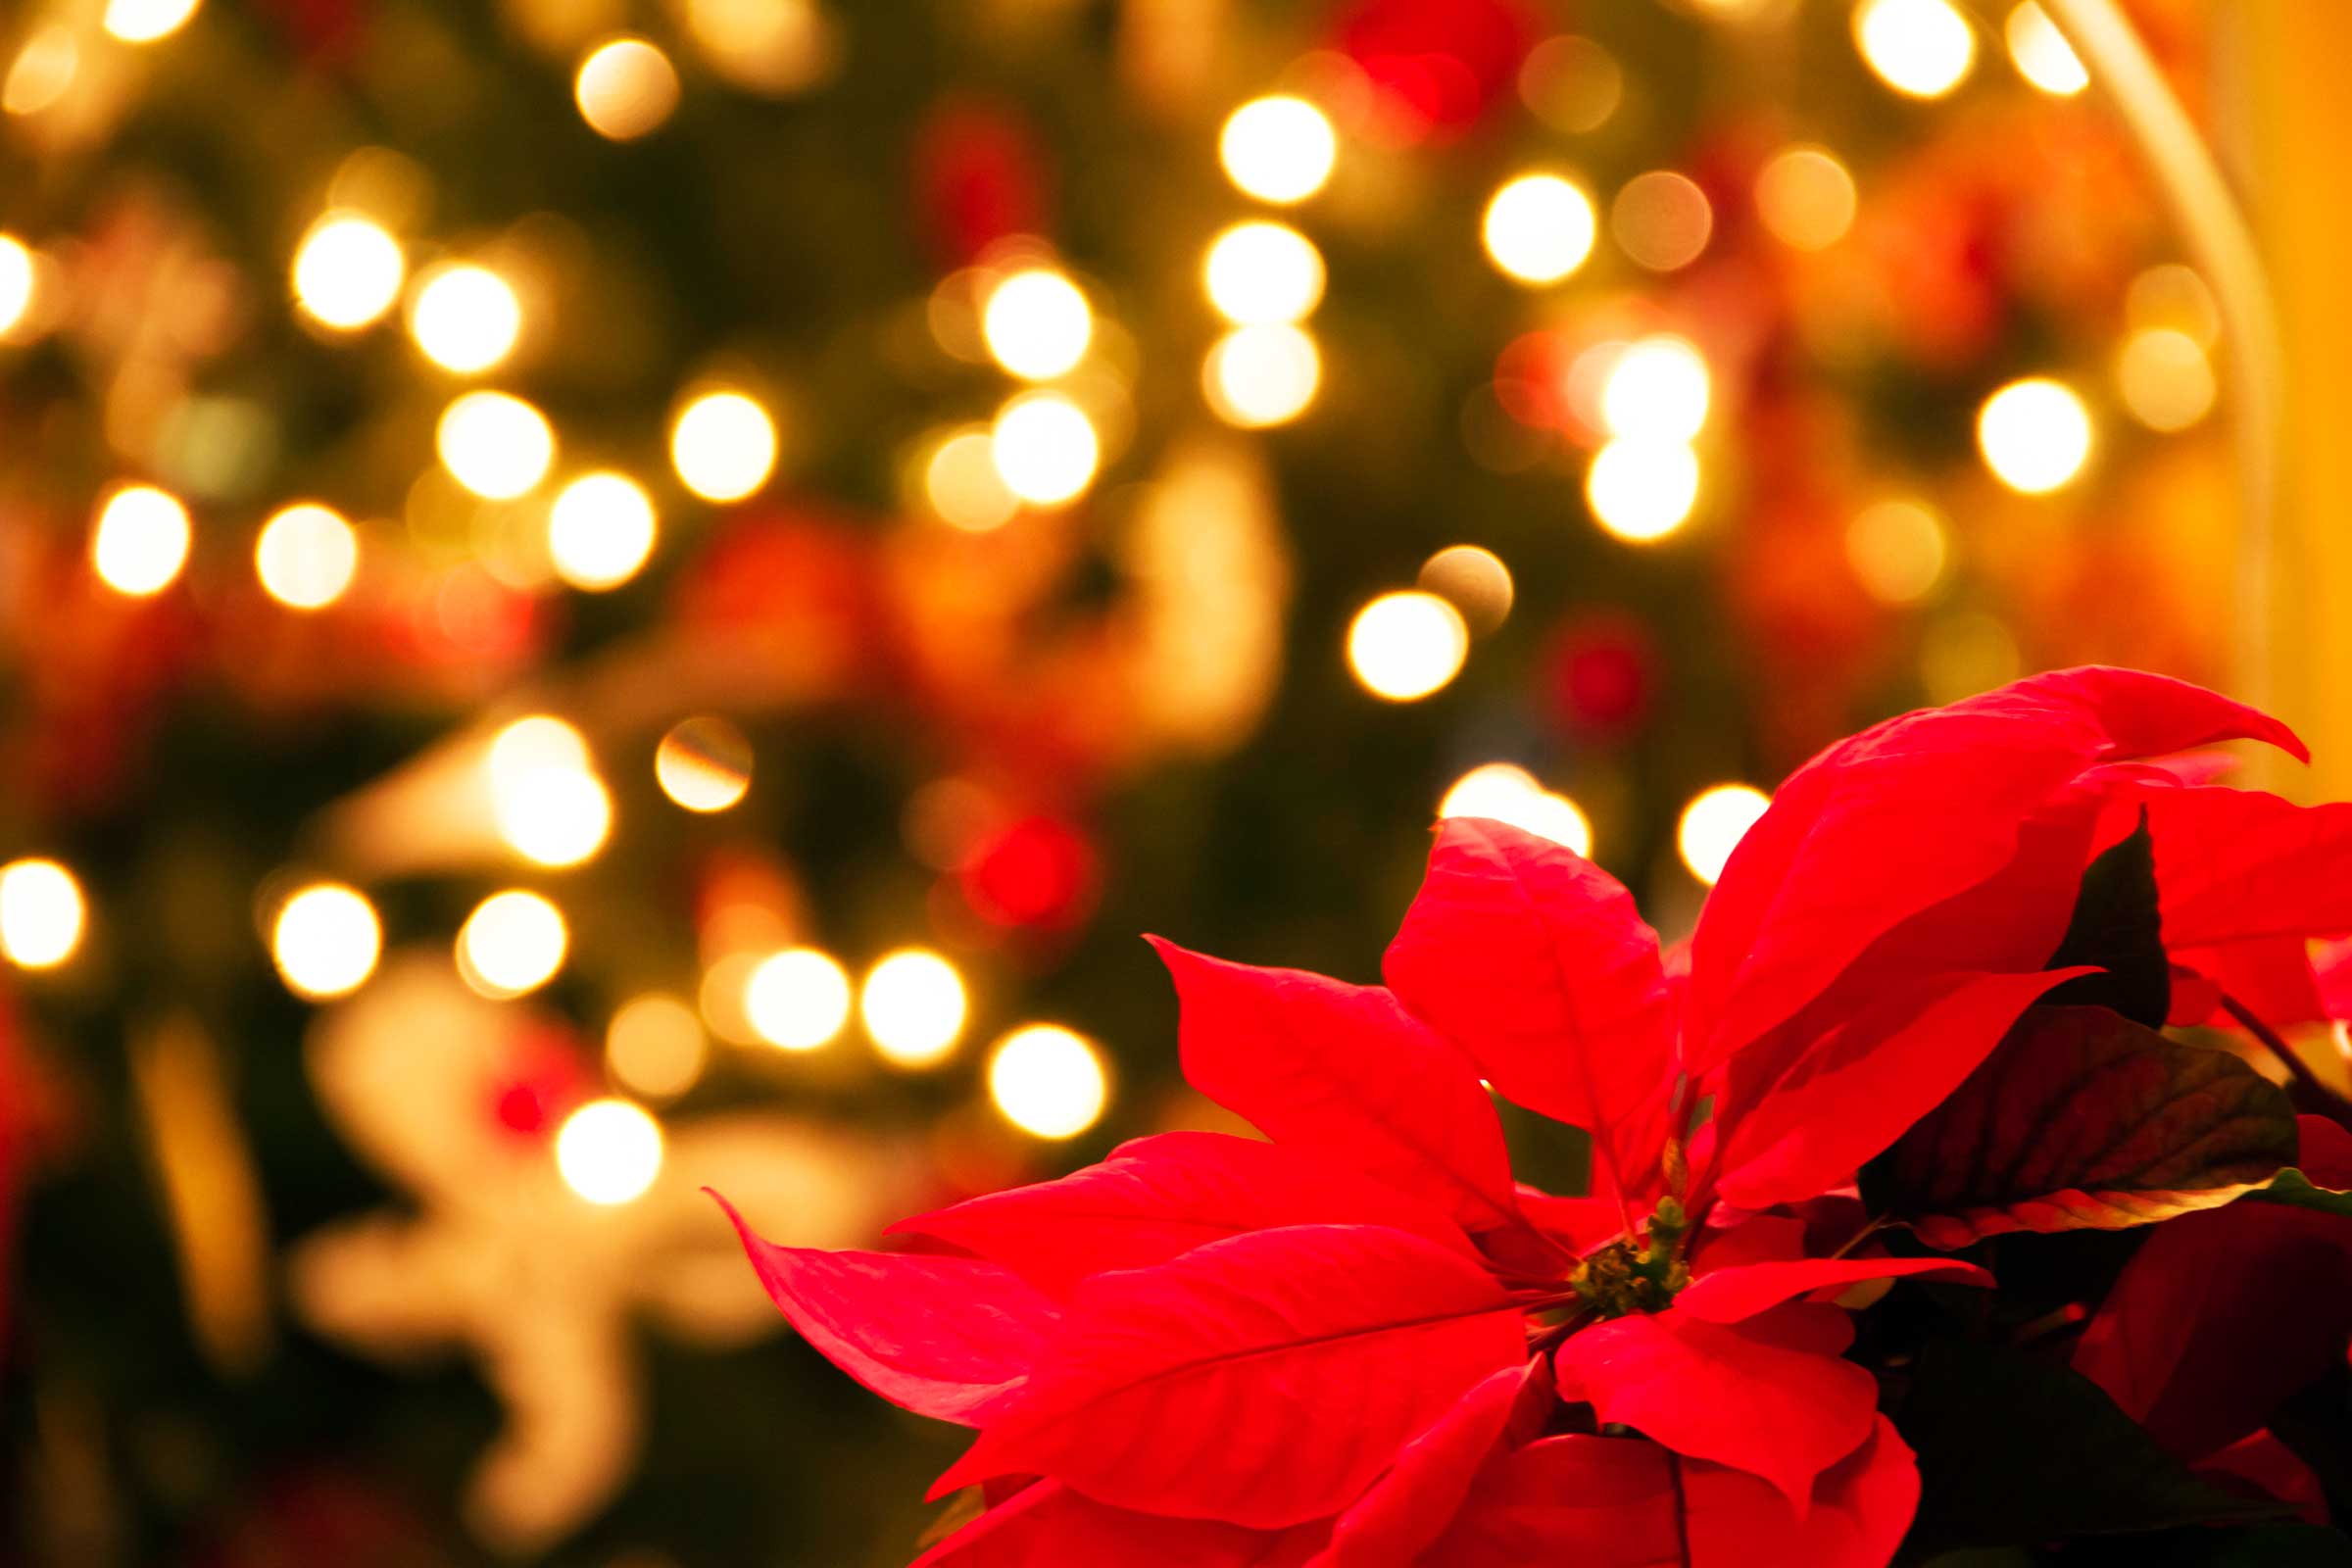 Why Poinsettias Are the Official Christmas Flower | Reader's Digest